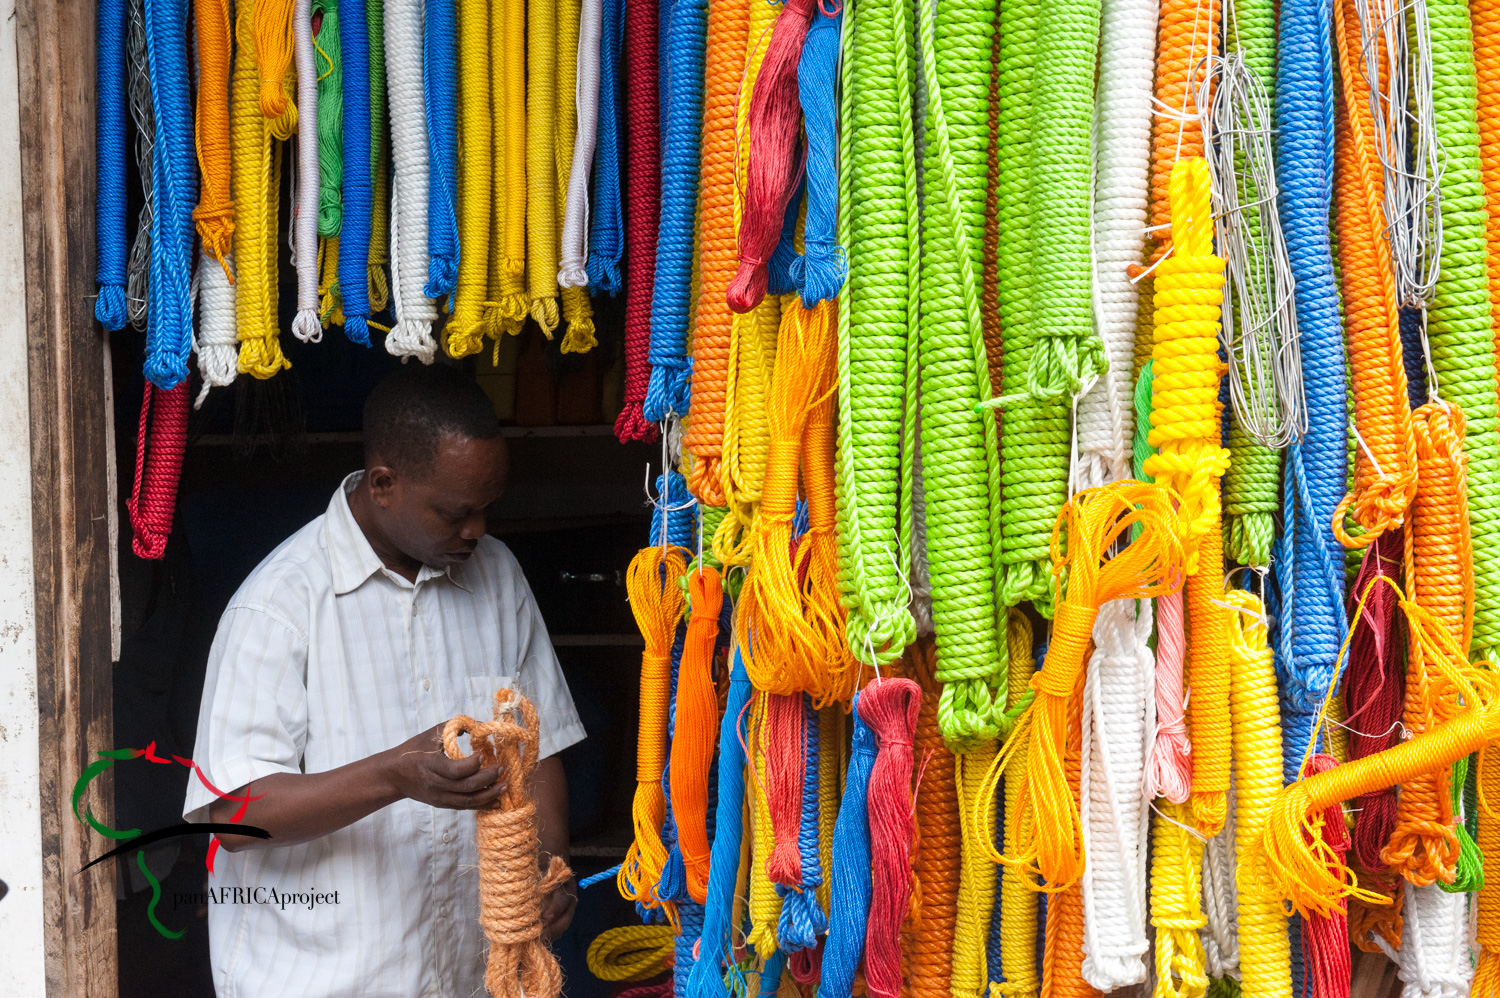 A man selling rope